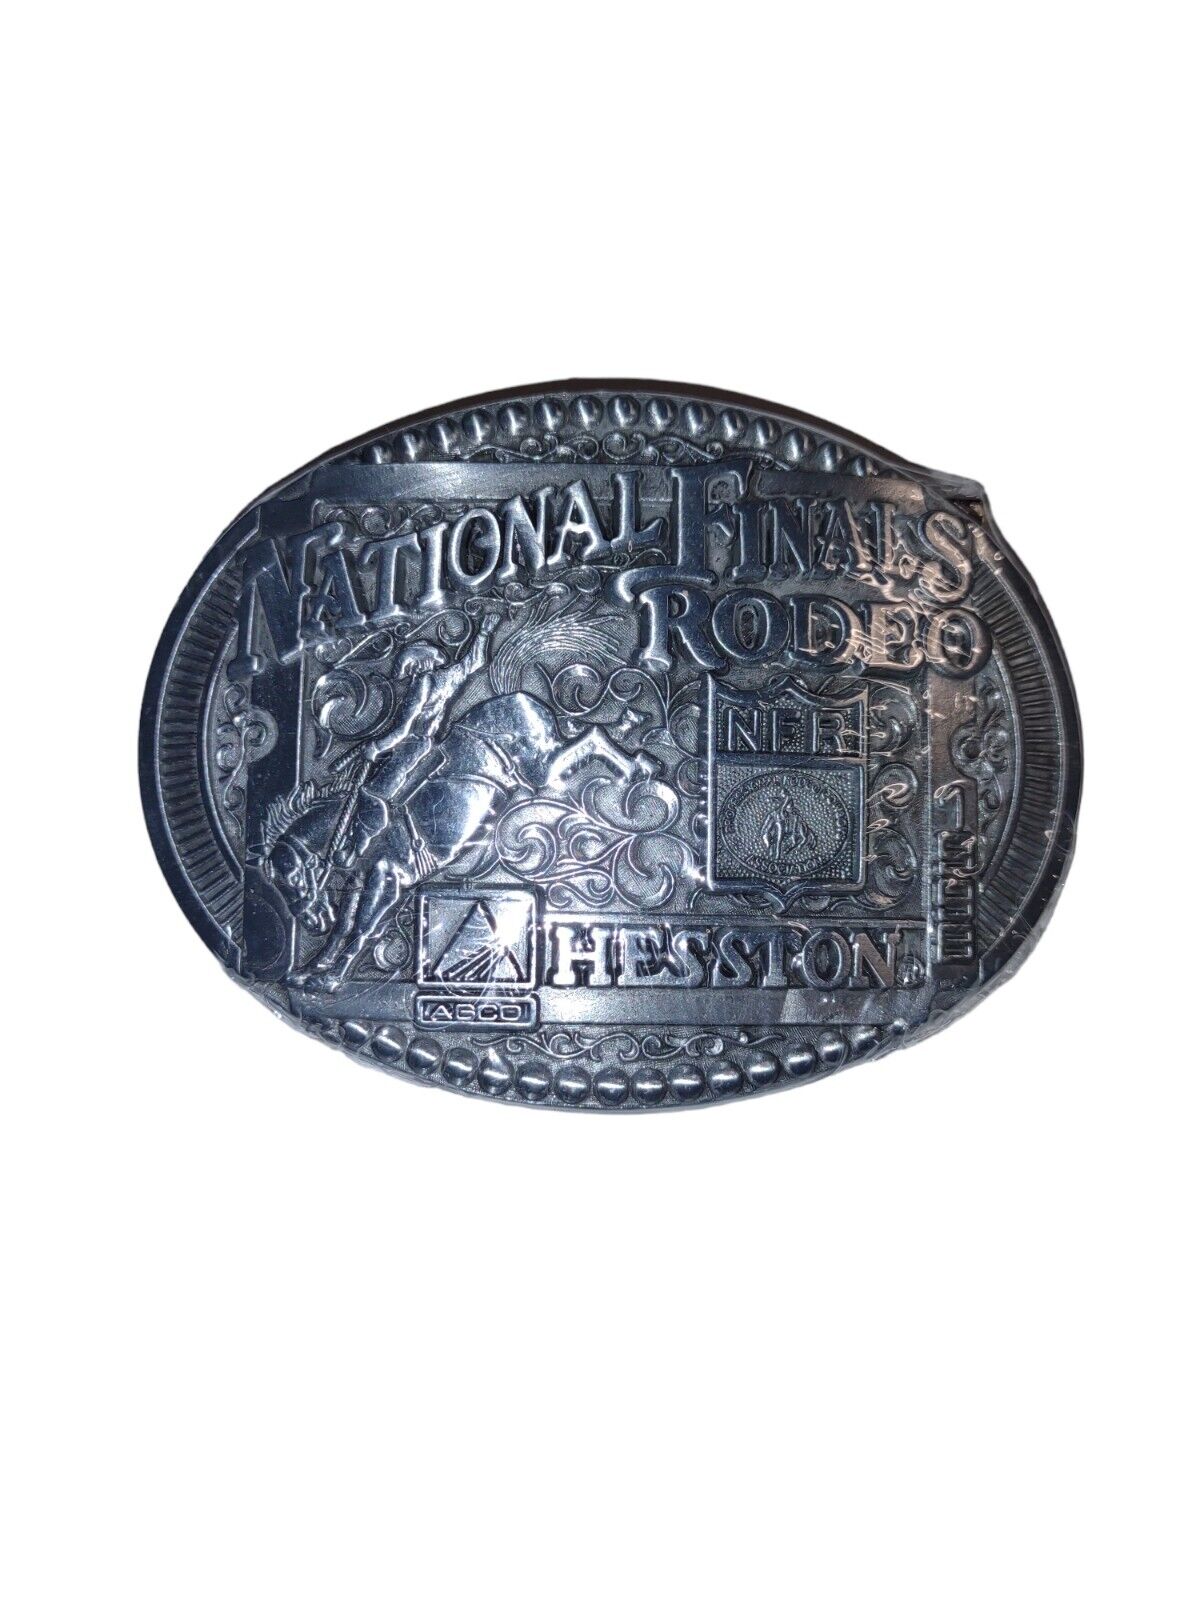 1998 Limited Edition Hesston National Finals Rodeo Belt Buckle